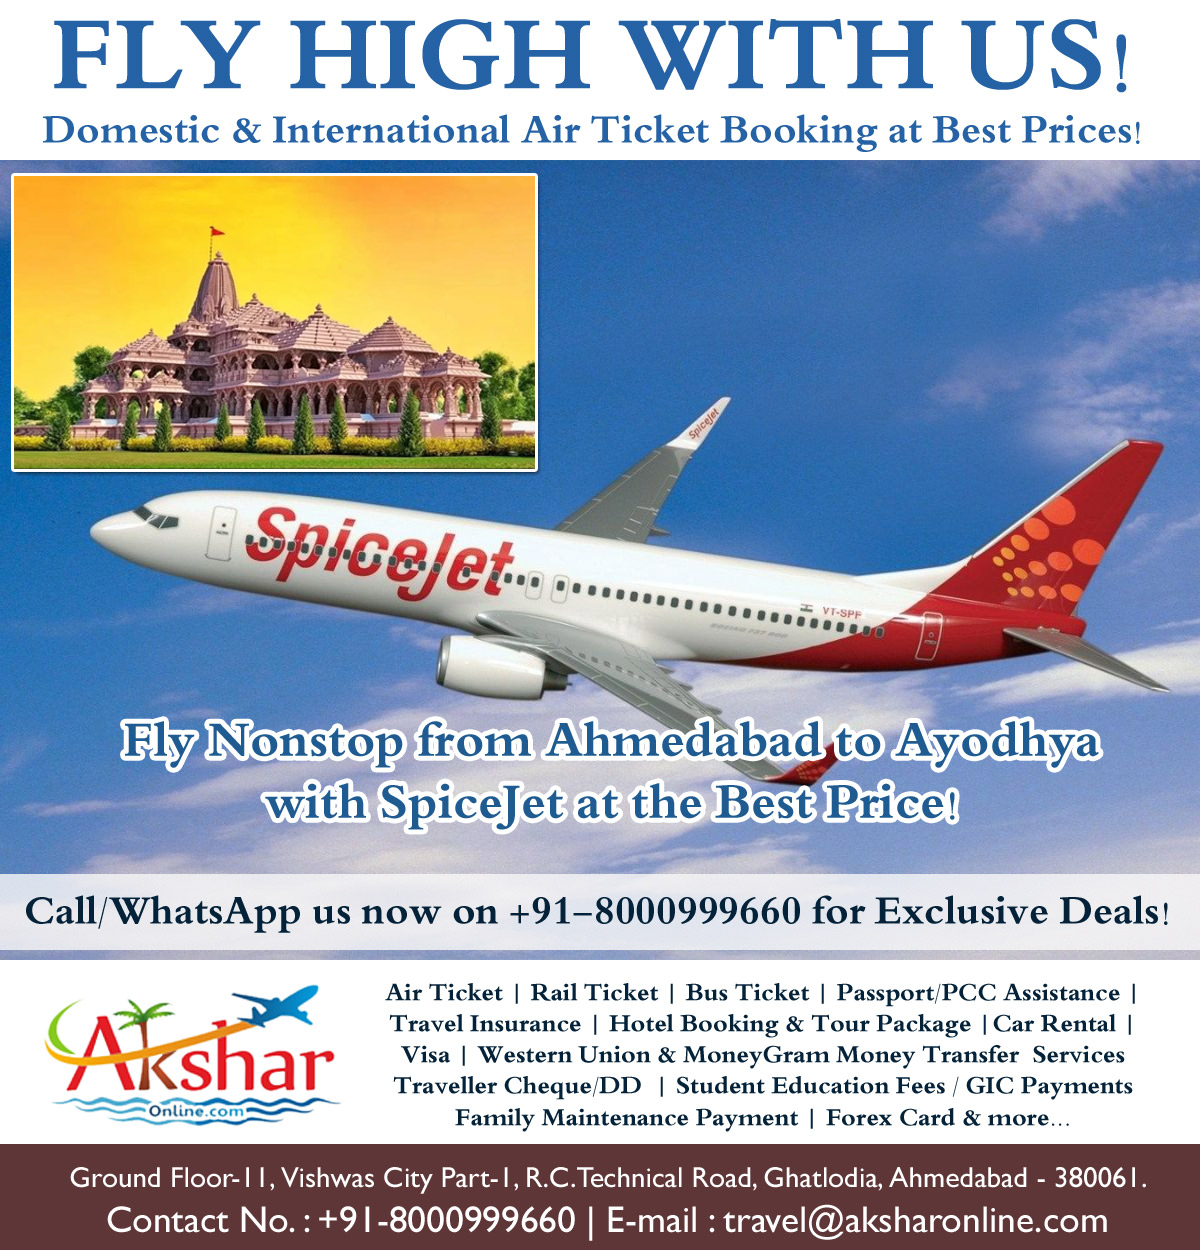 🛫✨ Exciting Announcement! Fly Nonstop from Ahmedabad to Ayodhya with SpiceJet at the Best Price! 🎉 Don't miss out on this fantastic opportunity to explore the sacred city hassle-free! Book your tickets now! Simply give us a call at +91-8000999660. #SpiceJet #NonstopAyodhya #AyodhyaFlight #AhmedabadToAyodhya #TravelGoals ✈️🕌, Air travel Nonstop flights Ahmedabad Ayodhya SpiceJet Best price Hassle-free travel Sacred city Explore Booking Call now Travel deals Adventure Convenience Flight experience Travel goals Journey Destination Excitement Cultural exploration